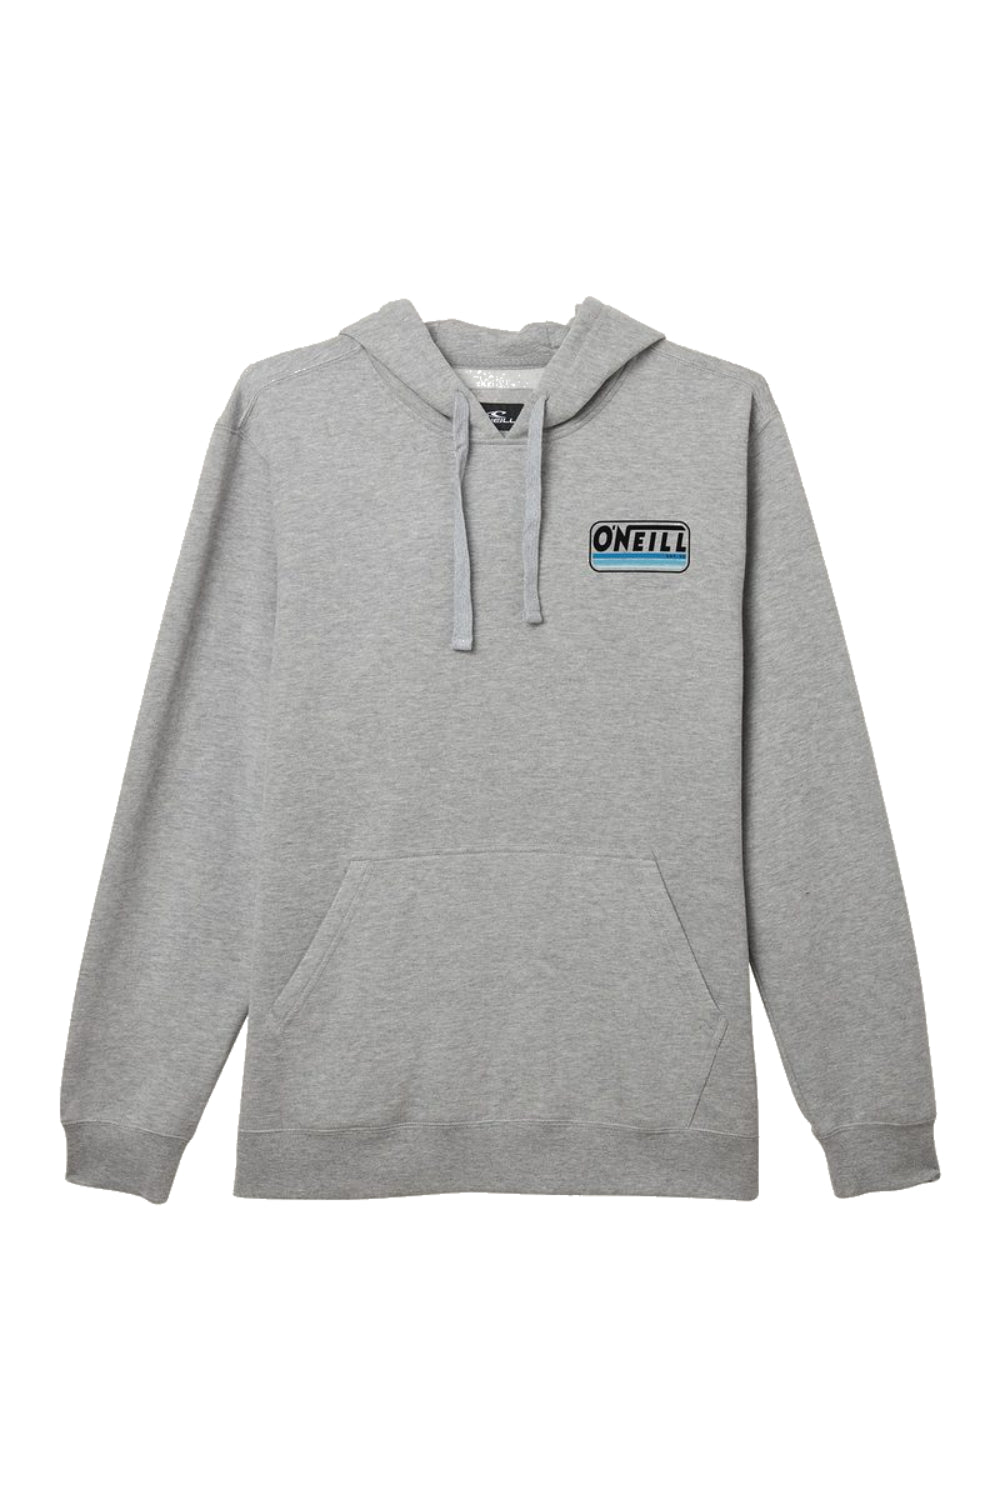 Oneill Fifty Two Pullover Fleece HGR L